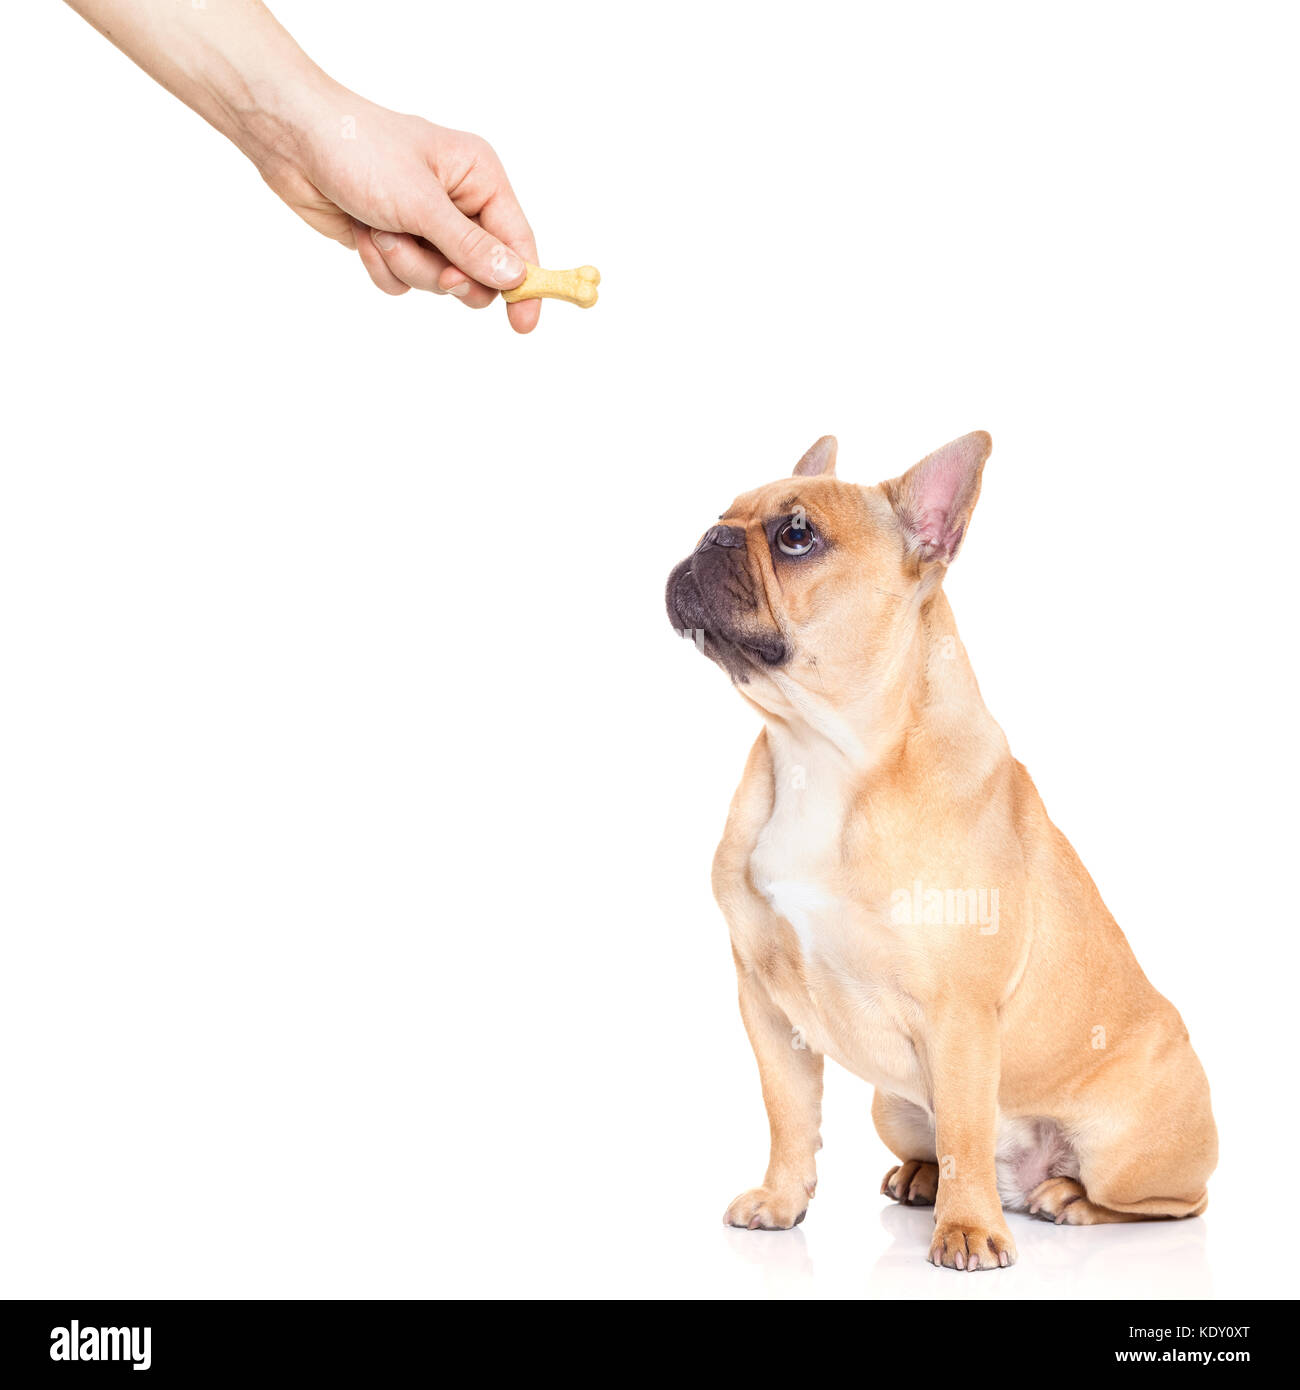 fawn bulldog dog getting a cookie as a treat for good behavior,isolated on white background Stock Photo